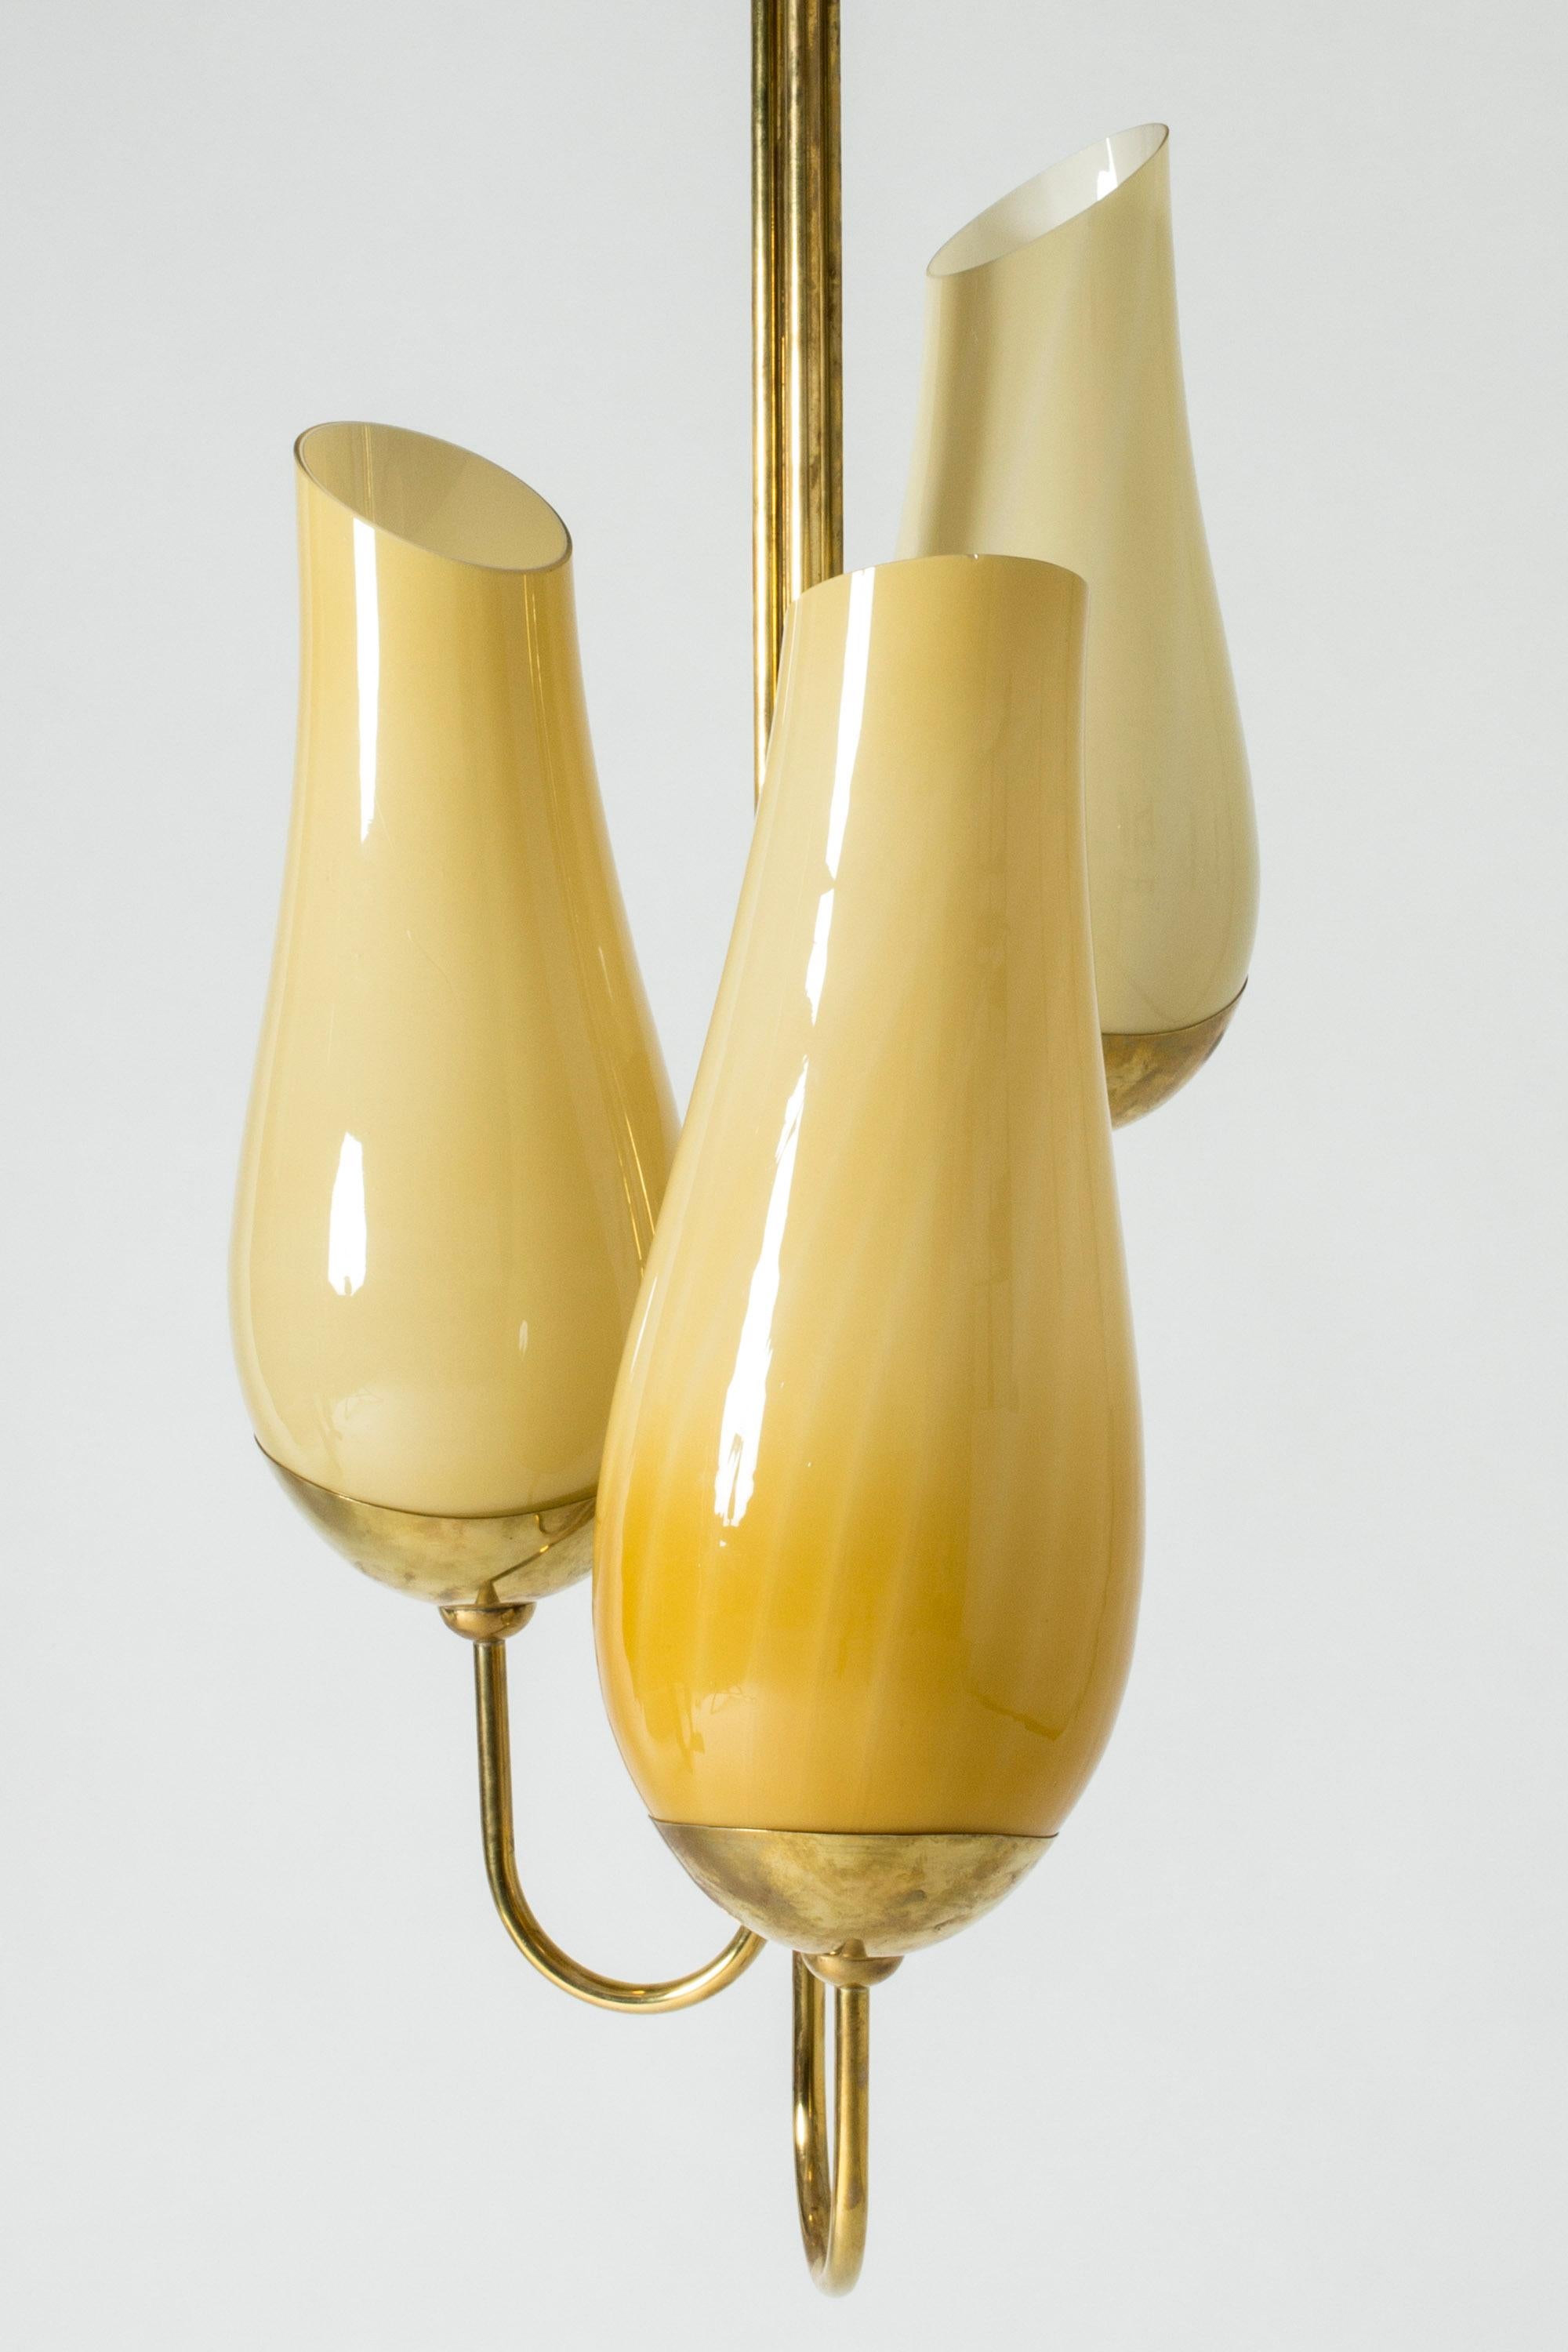 Finnish Brass and Glass Cgandelier by Paavo Tynell and Gunnel Nyman for Taito Oy, 1940s For Sale